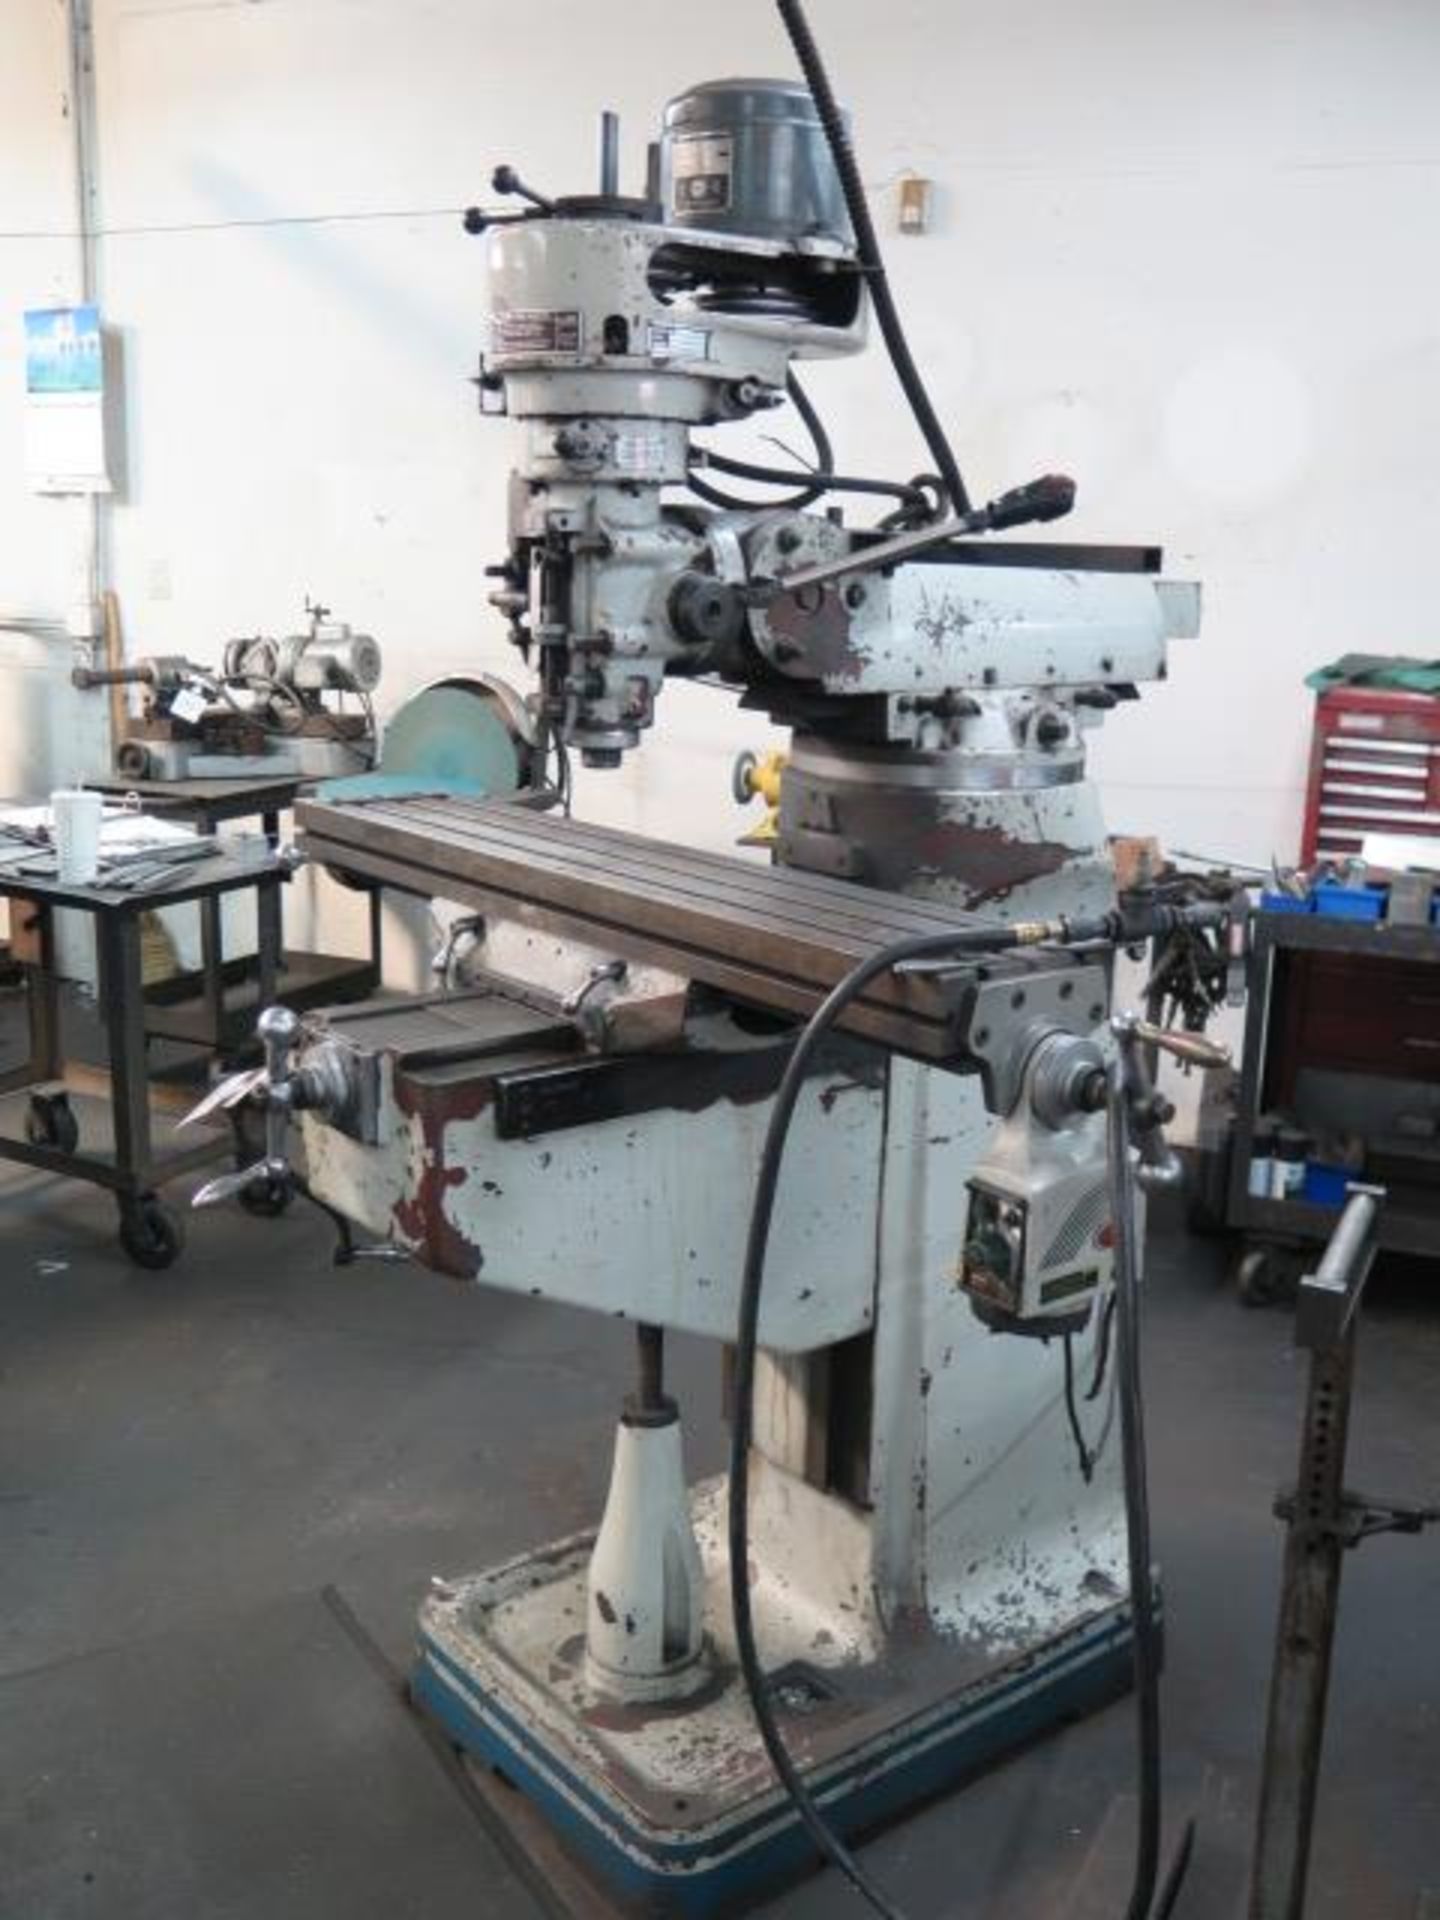 Acra AM-2S Vertical Mill s/n 96-1073-1 w/ 1Hp Motor, 80-5440 RPM, 16-Speeds, Power Feed, SOLD AS IS - Image 2 of 12